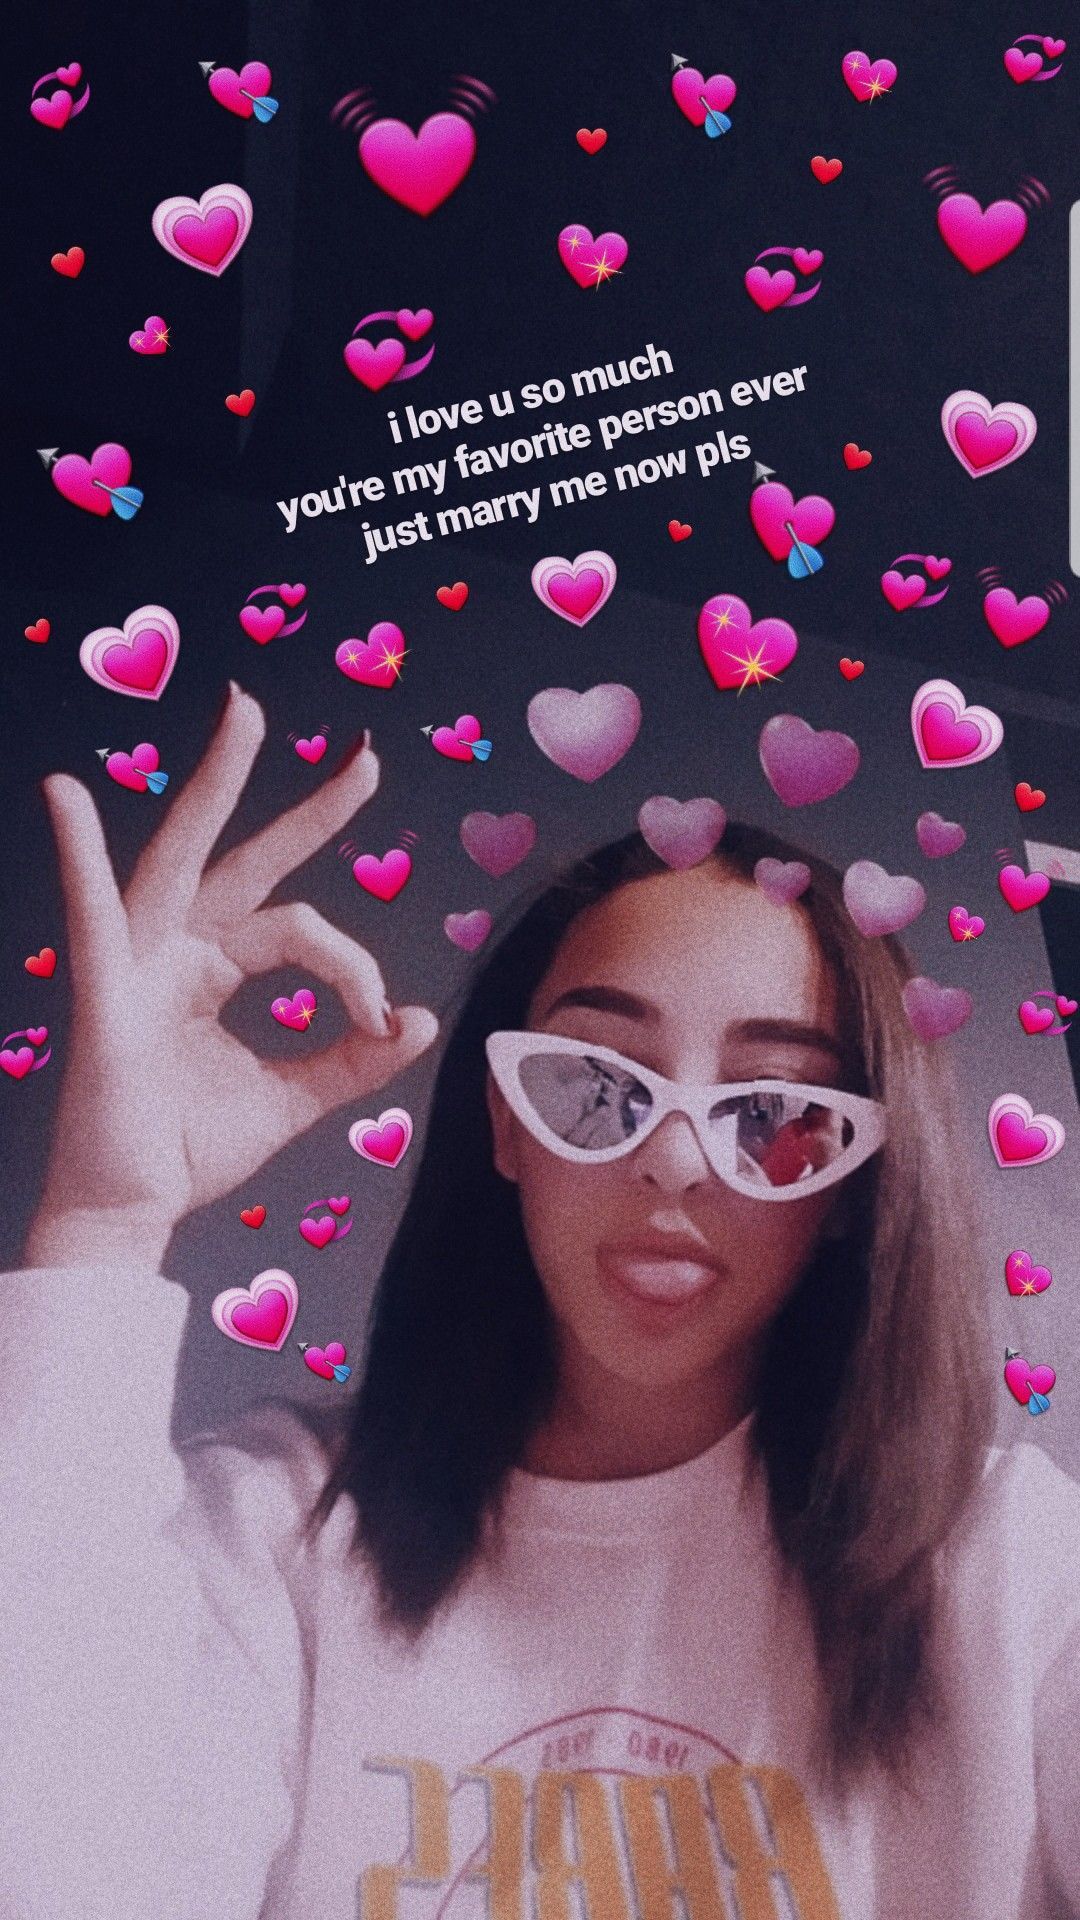 cute wholesome meme hearts this to your crush